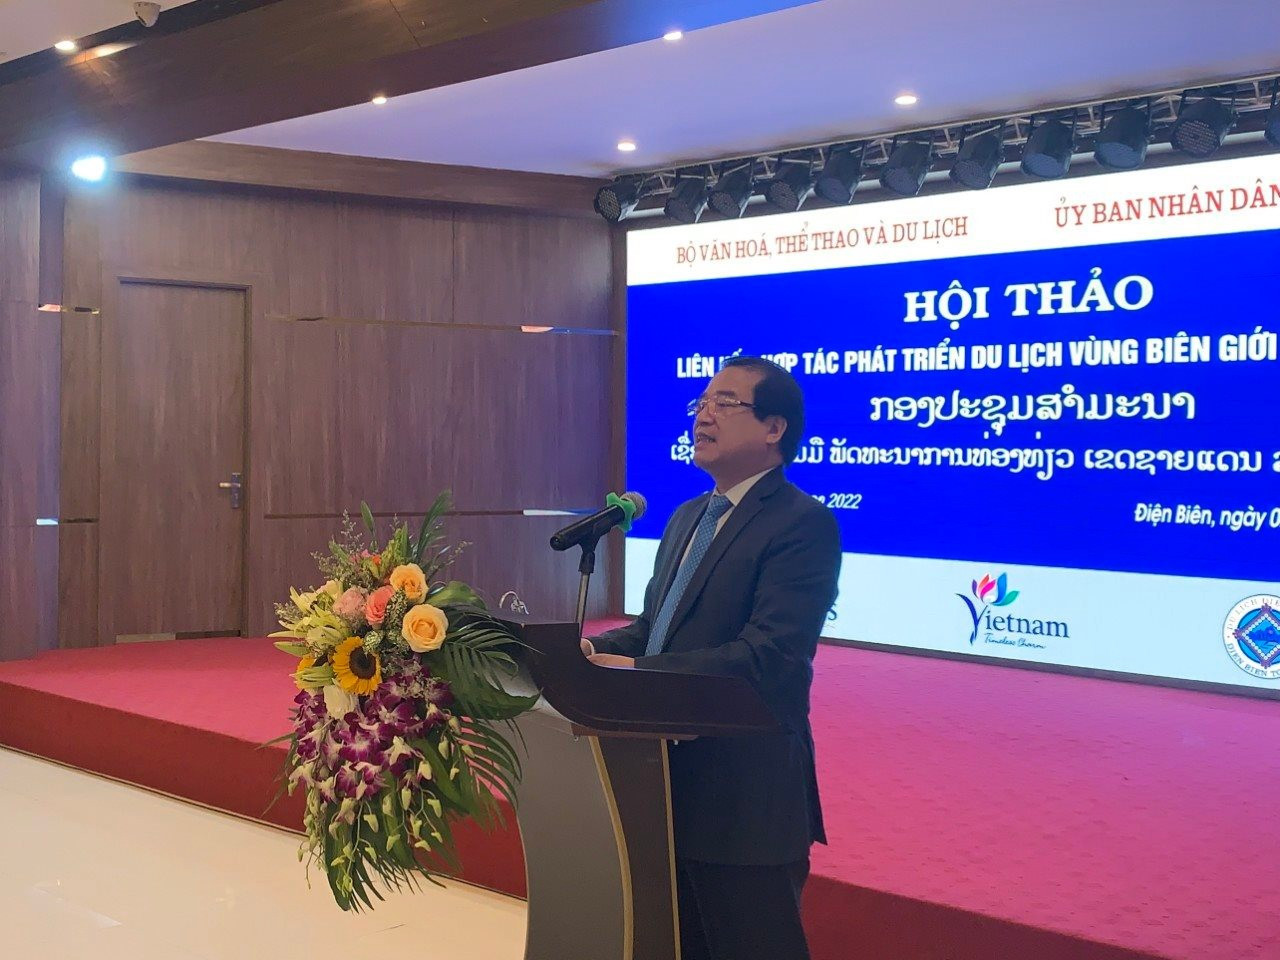 Deputy Director General of the Vietnam National Administration of Tourism Ha Van Sieu at the conference